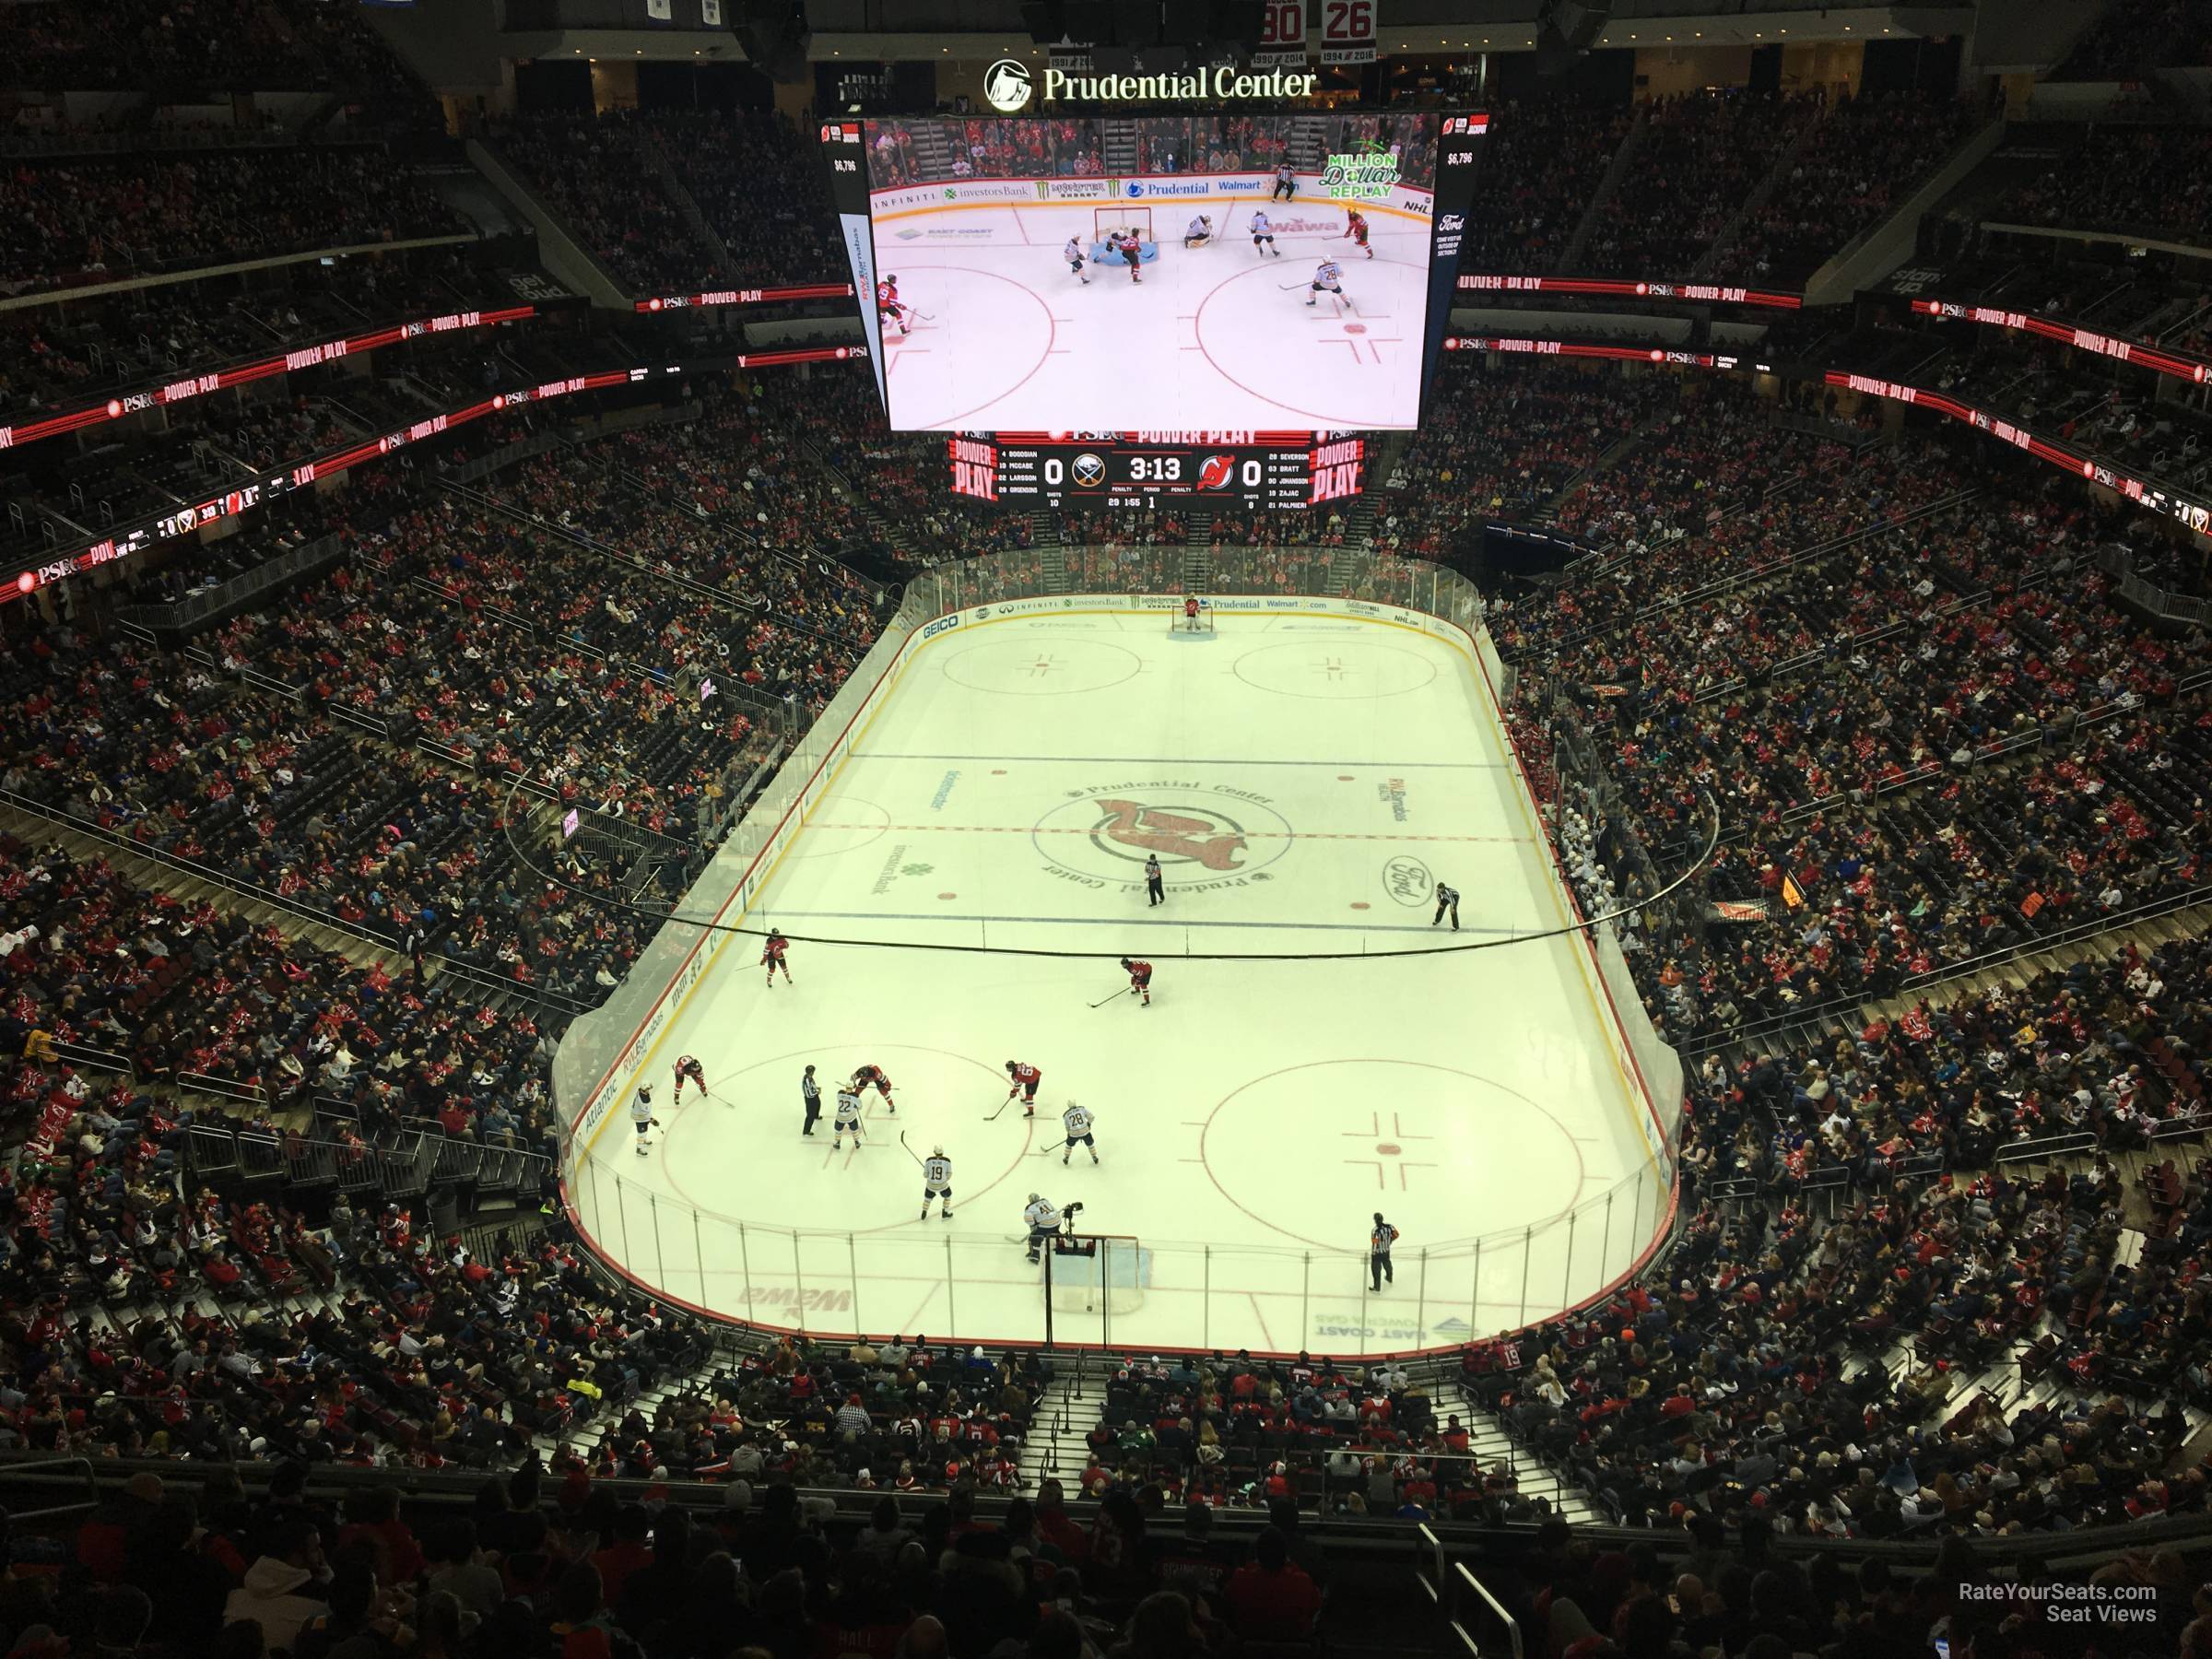 Section 1 at Prudential Center 